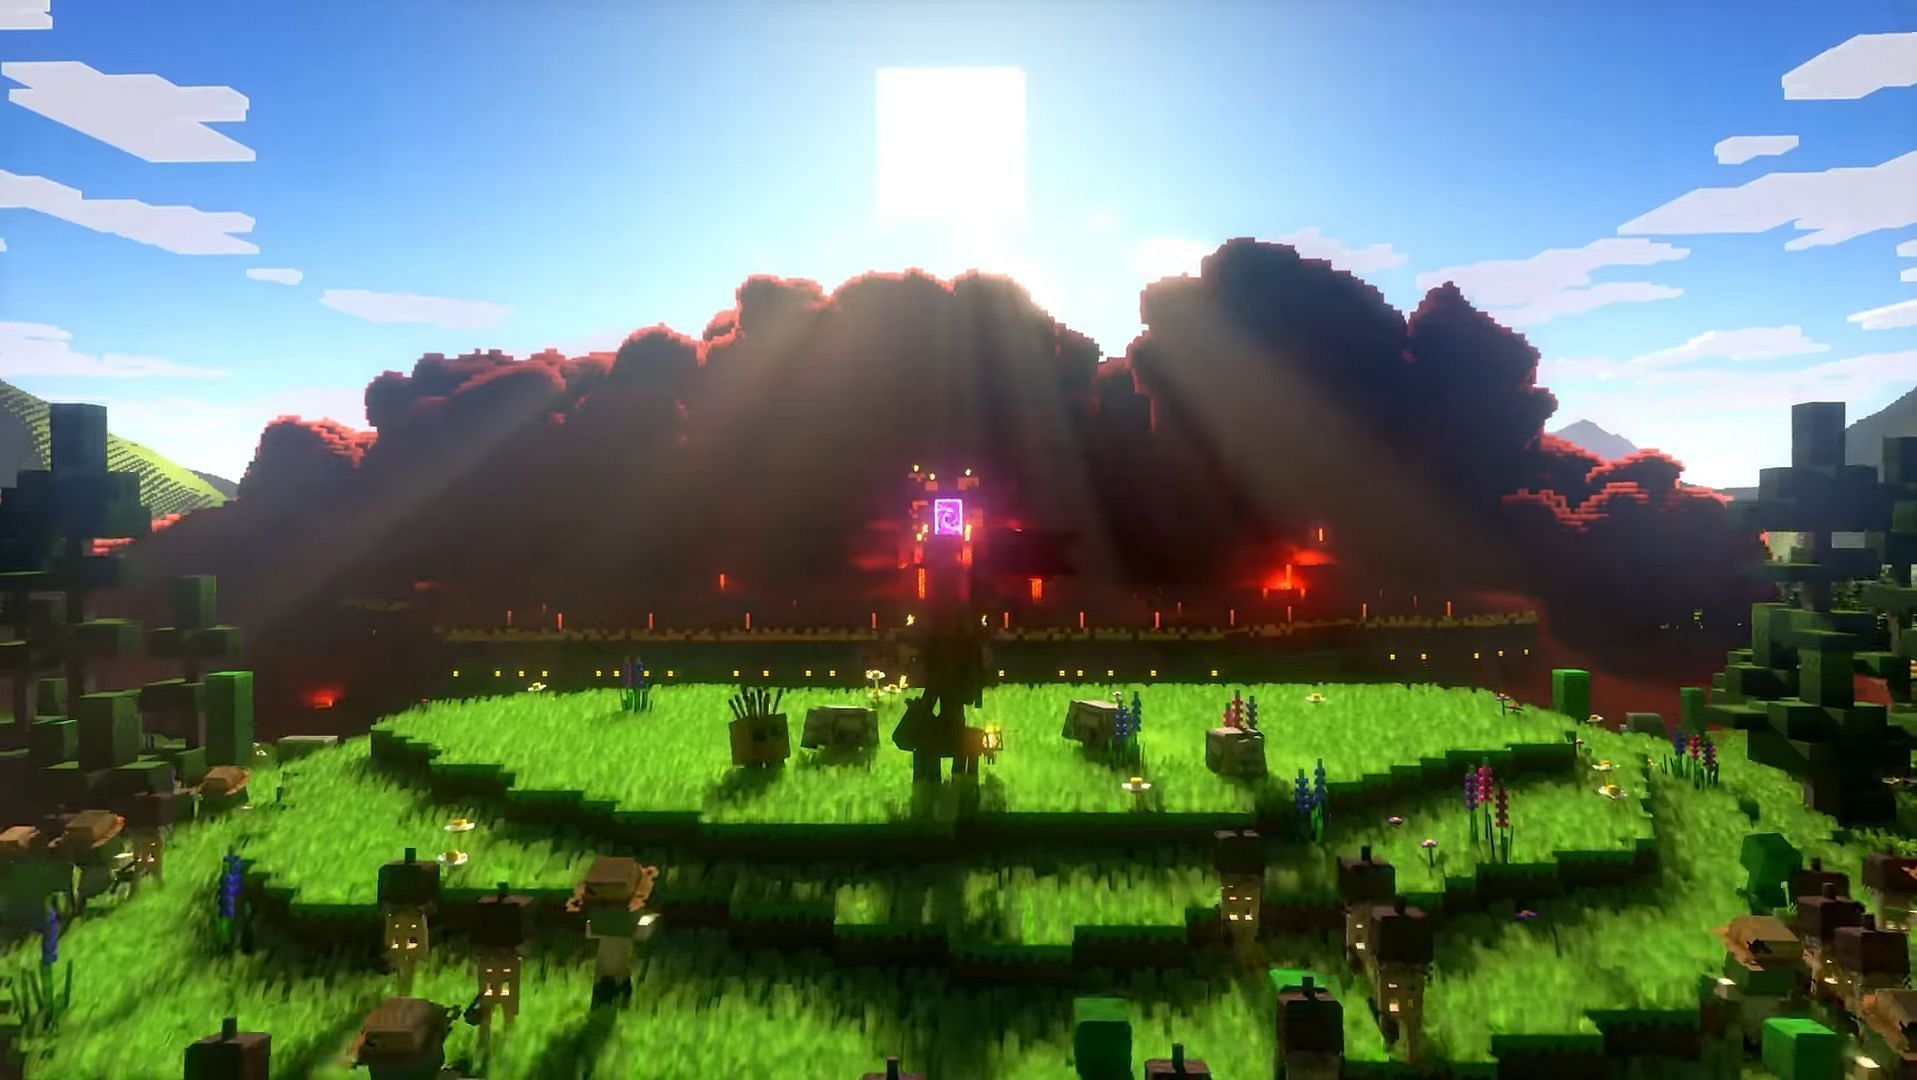 The player will protect the Overworld from Nether corruption in Minecraft Legends (Image via YouTube/Minecraft)